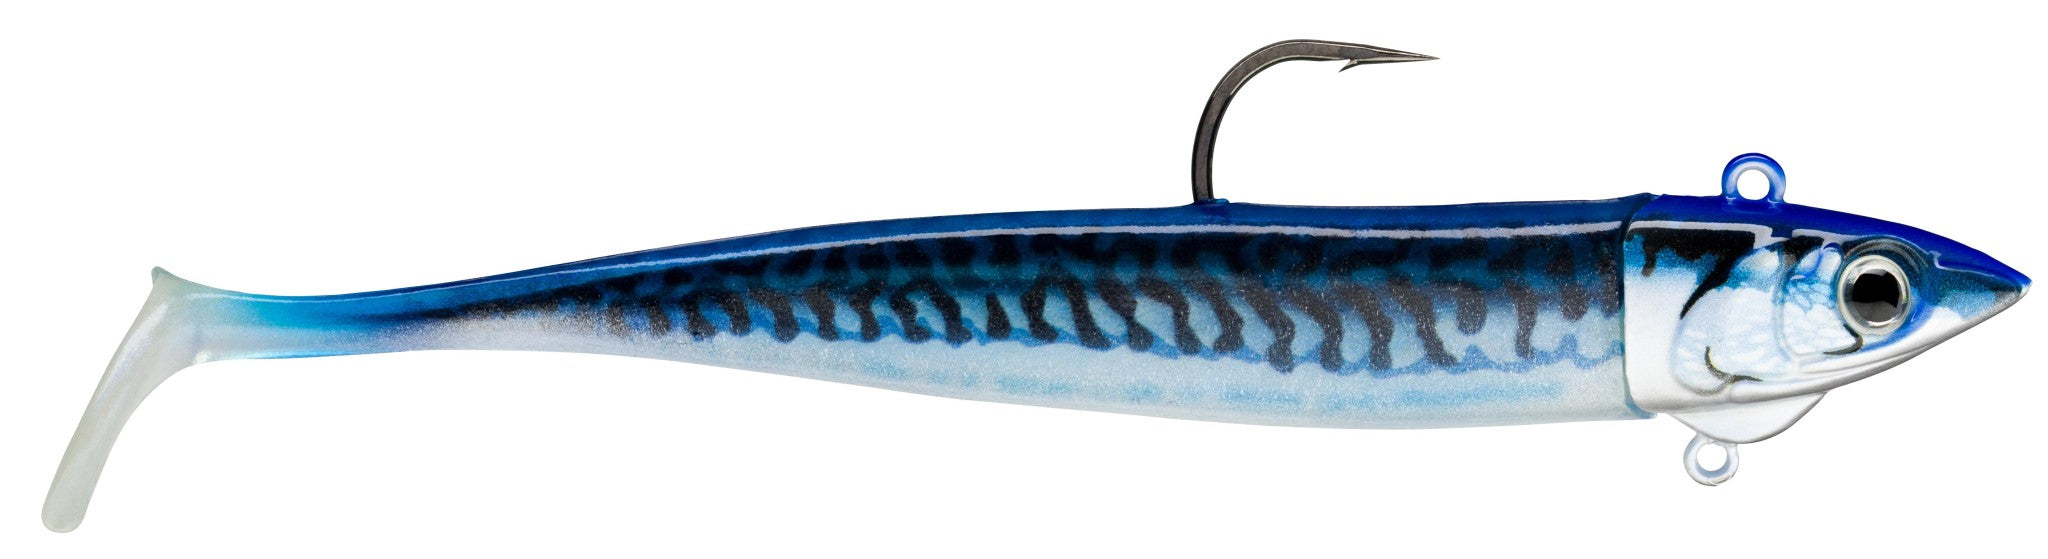 Storm 360GT Biscay Minnow Fishing Lures